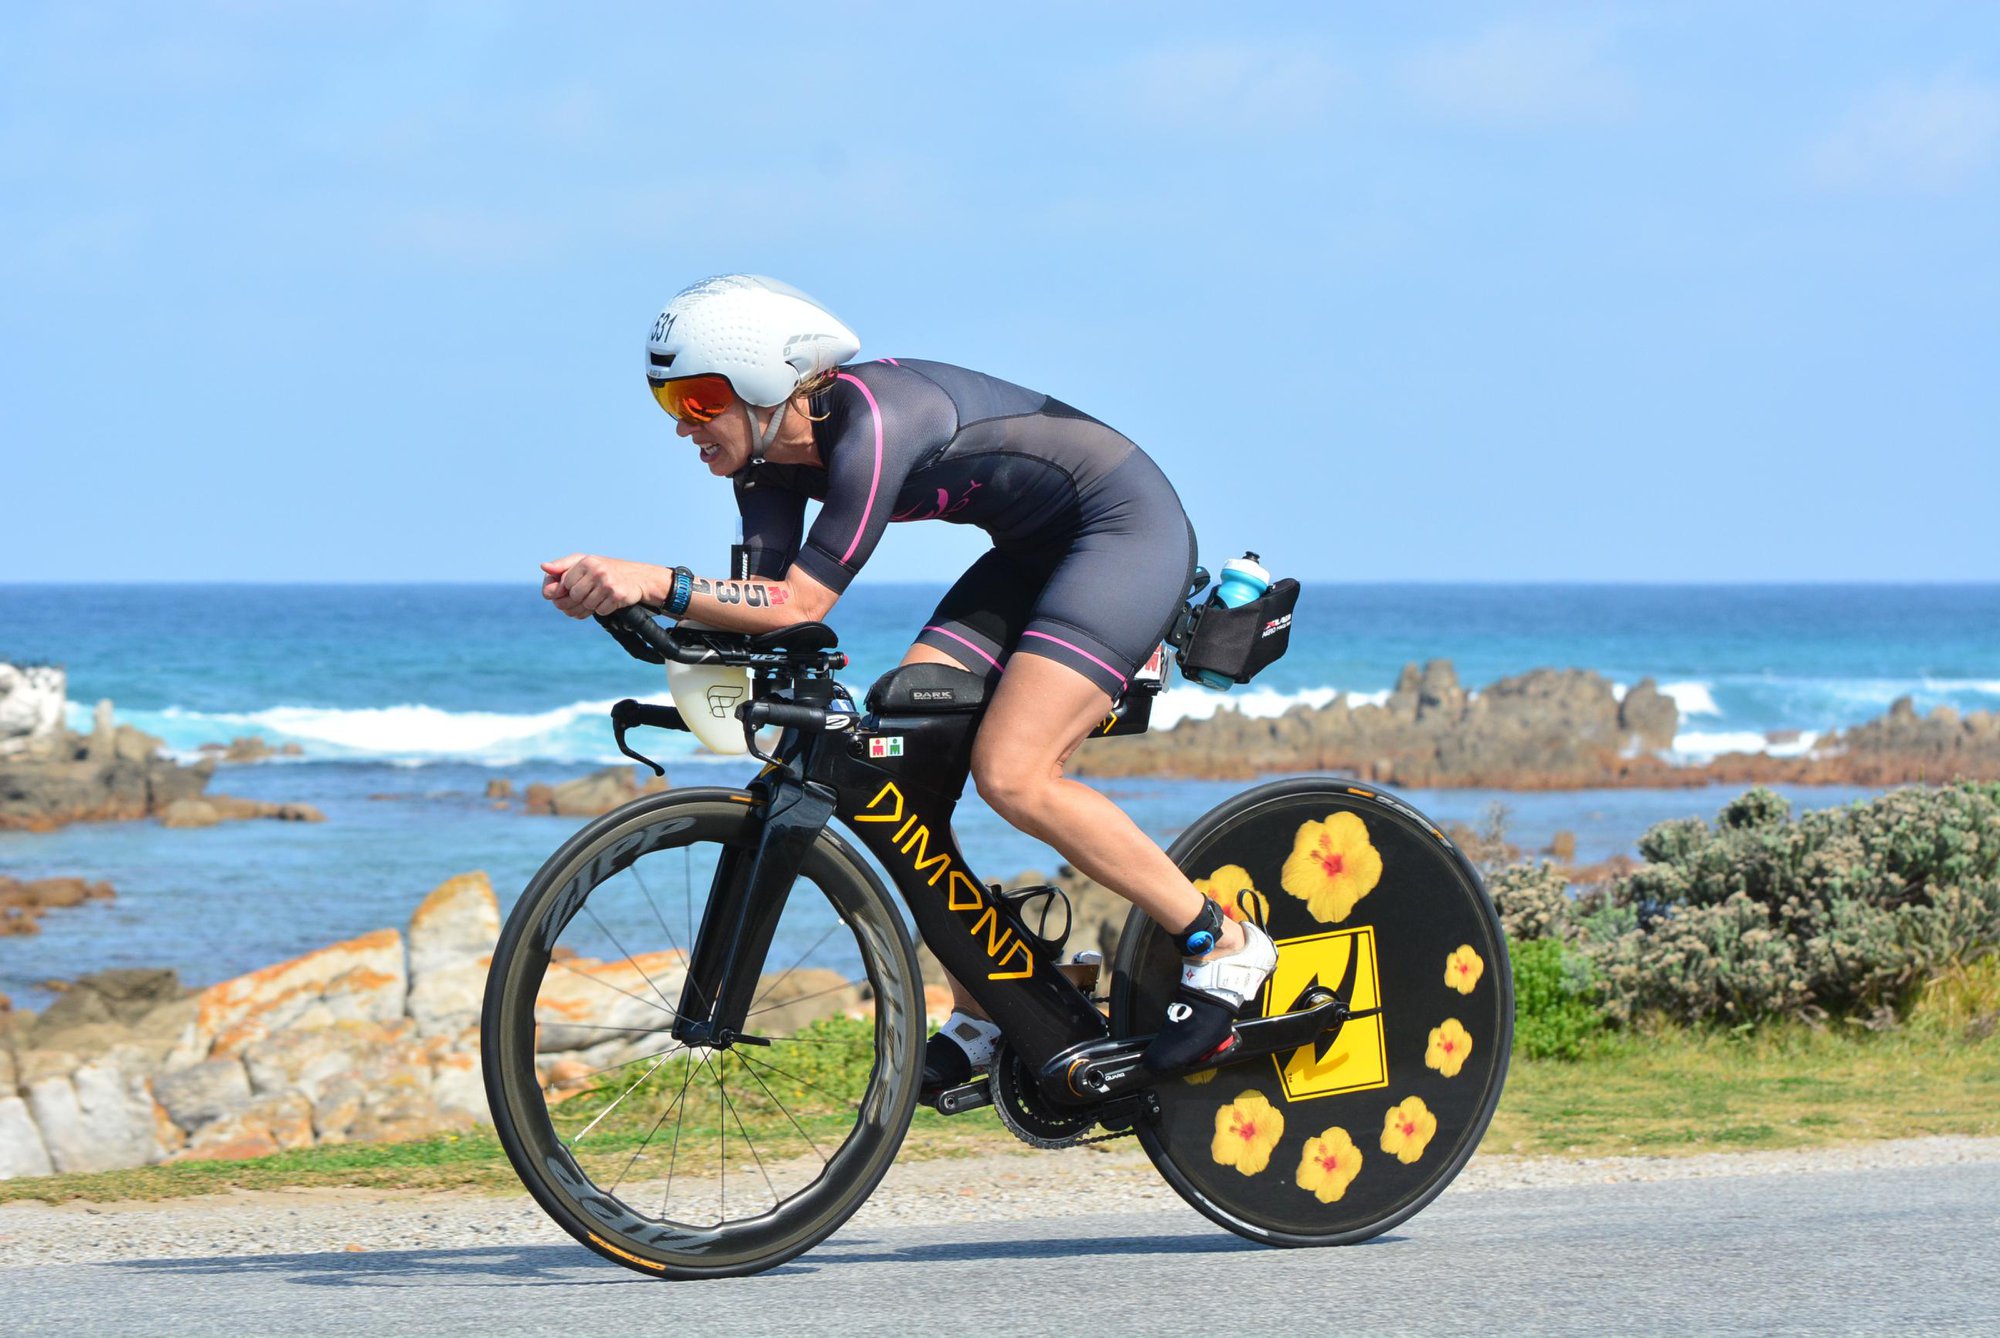 Coach_Terry_Wilson_Pursuit_of_The_Perfect_Race_IRONMAN_703_World_Championship_South_Africa_Rebecca_McKee_Bike.jpg